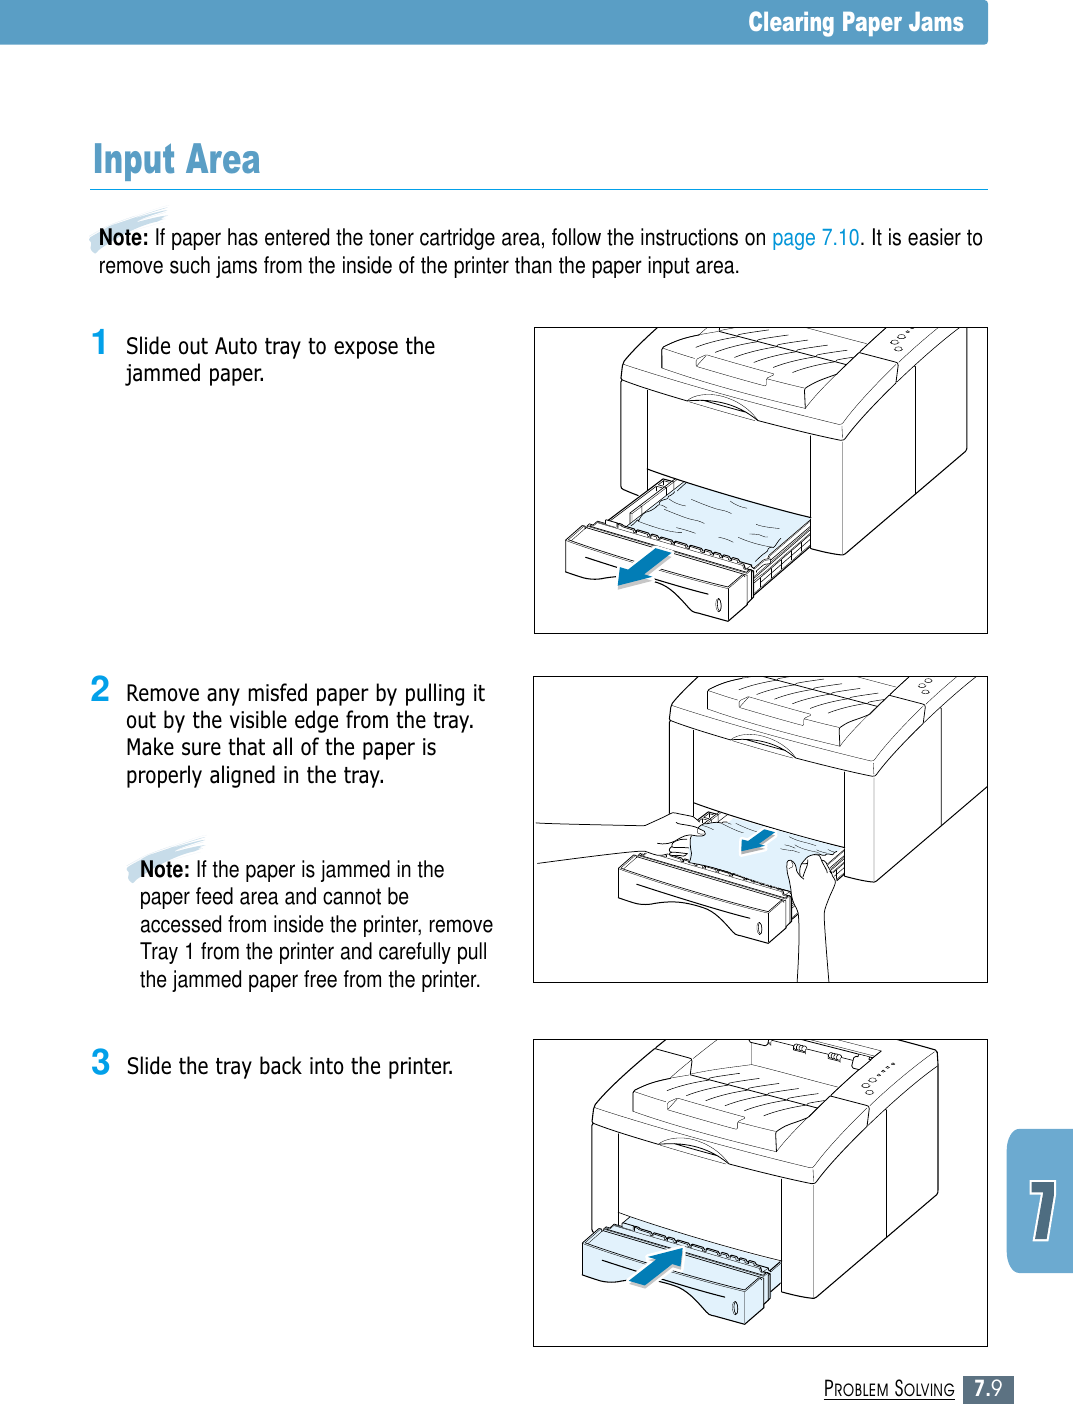 7.9PROBLEM SOLVINGClearing Paper Jams2Remove any misfed paper by pulling itout by the visible edge from the tray.Make sure that all of the paper isproperly aligned in the tray.Note: If paper has entered the toner cartridge area, follow the instructions on page 7.10. It is easier toremove such jams from the inside of the printer than the paper input area.Input Area1Slide out Auto tray to expose thejammed paper.Note: If the paper is jammed in thepaper feed area and cannot beaccessed from inside the printer, removeTray 1 from the printer and carefully pullthe jammed paper free from the printer.3Slide the tray back into the printer.